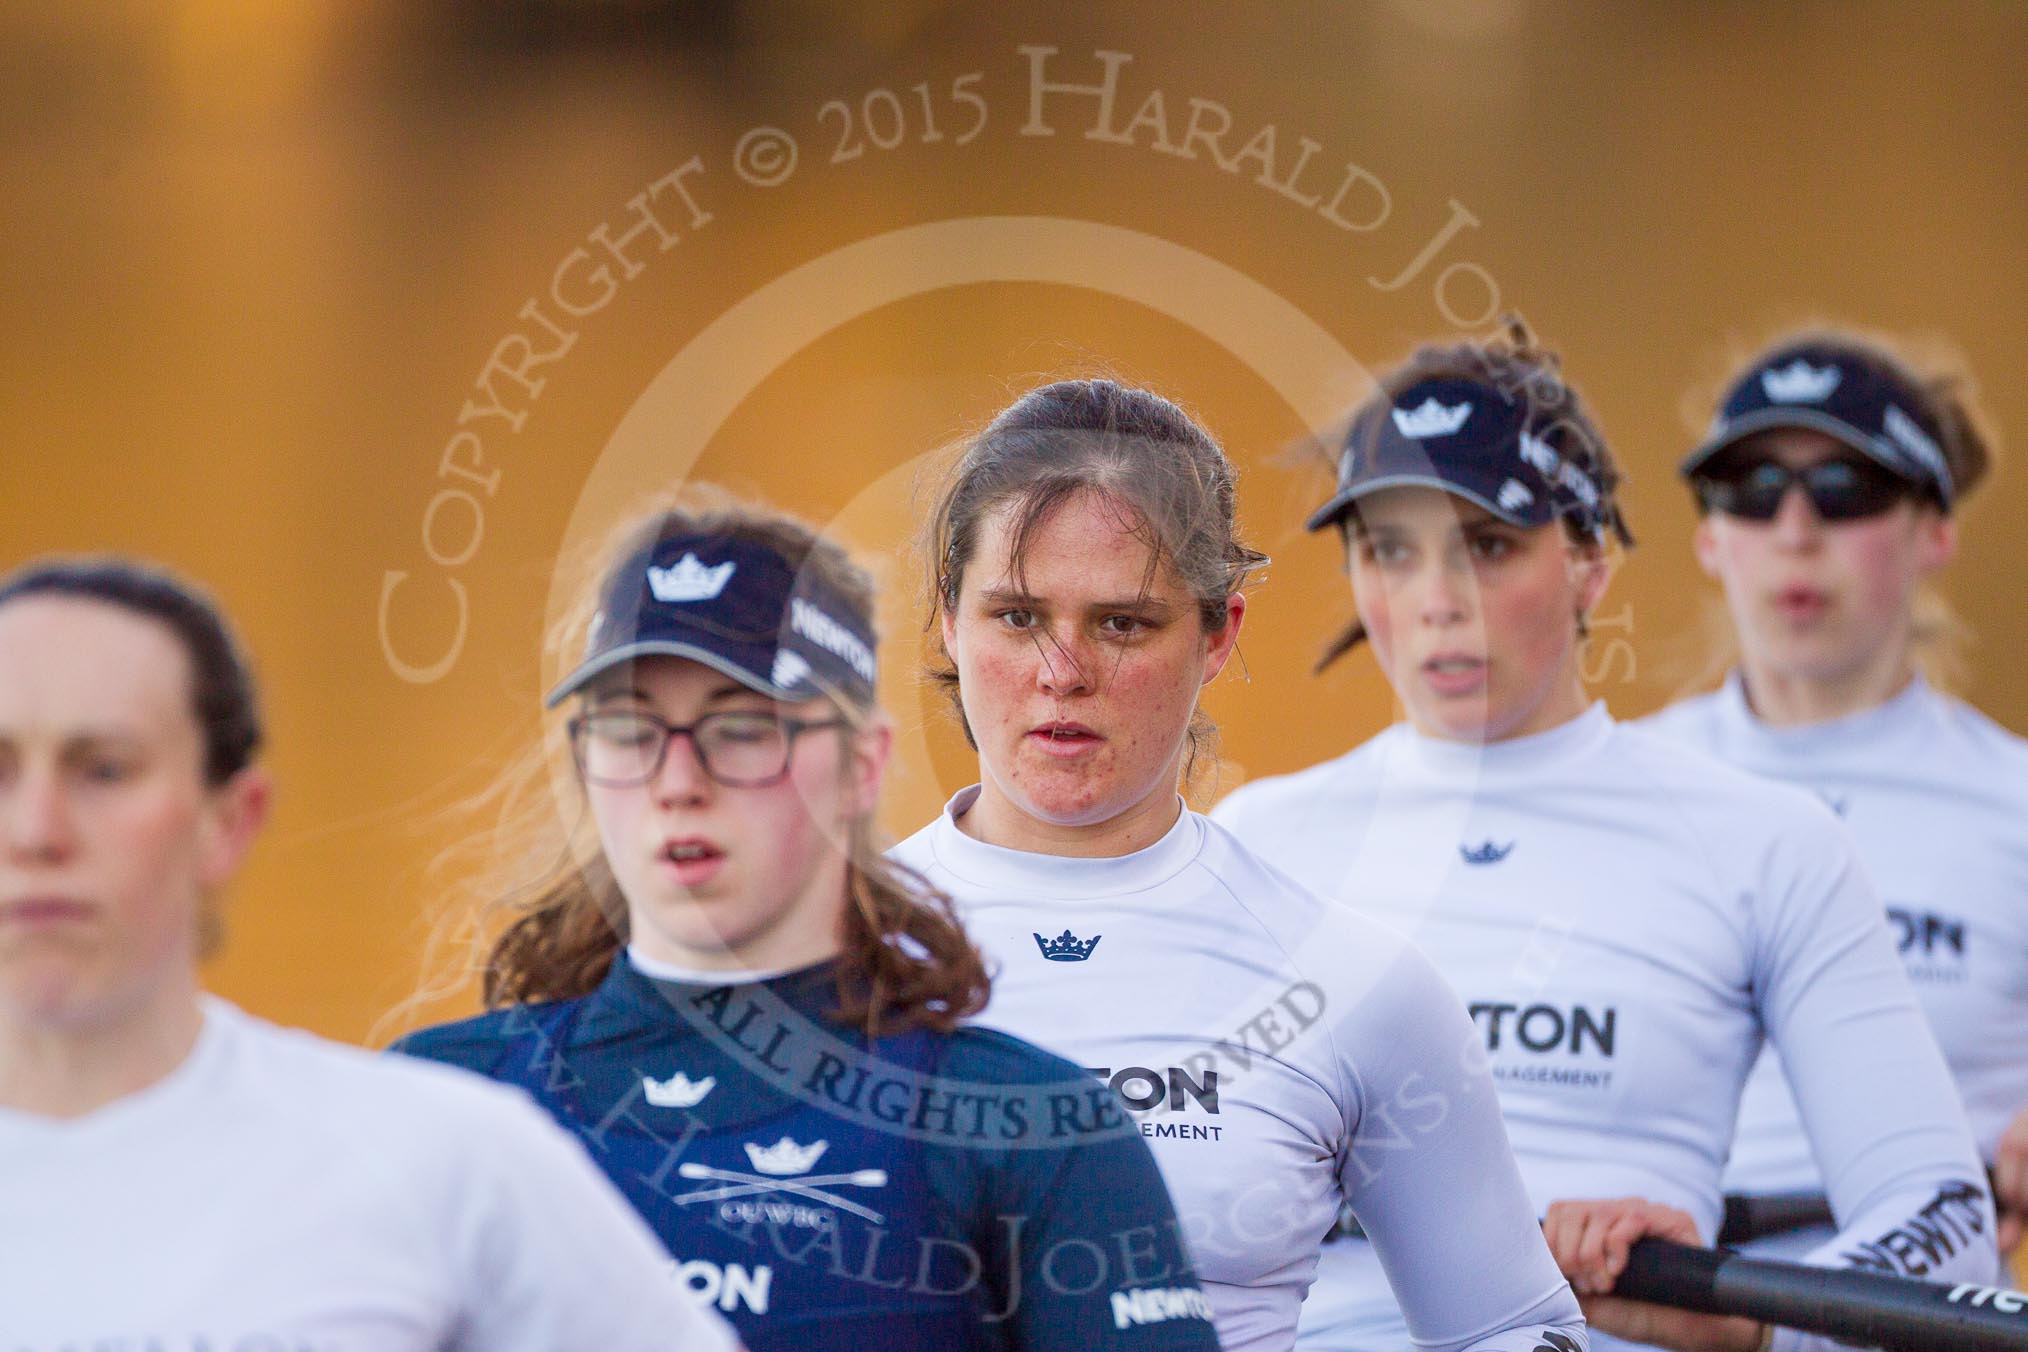 The Boat Race season 2015: OUWBC training Wallingford.

Wallingford,

United Kingdom,
on 04 March 2015 at 17:26, image #344